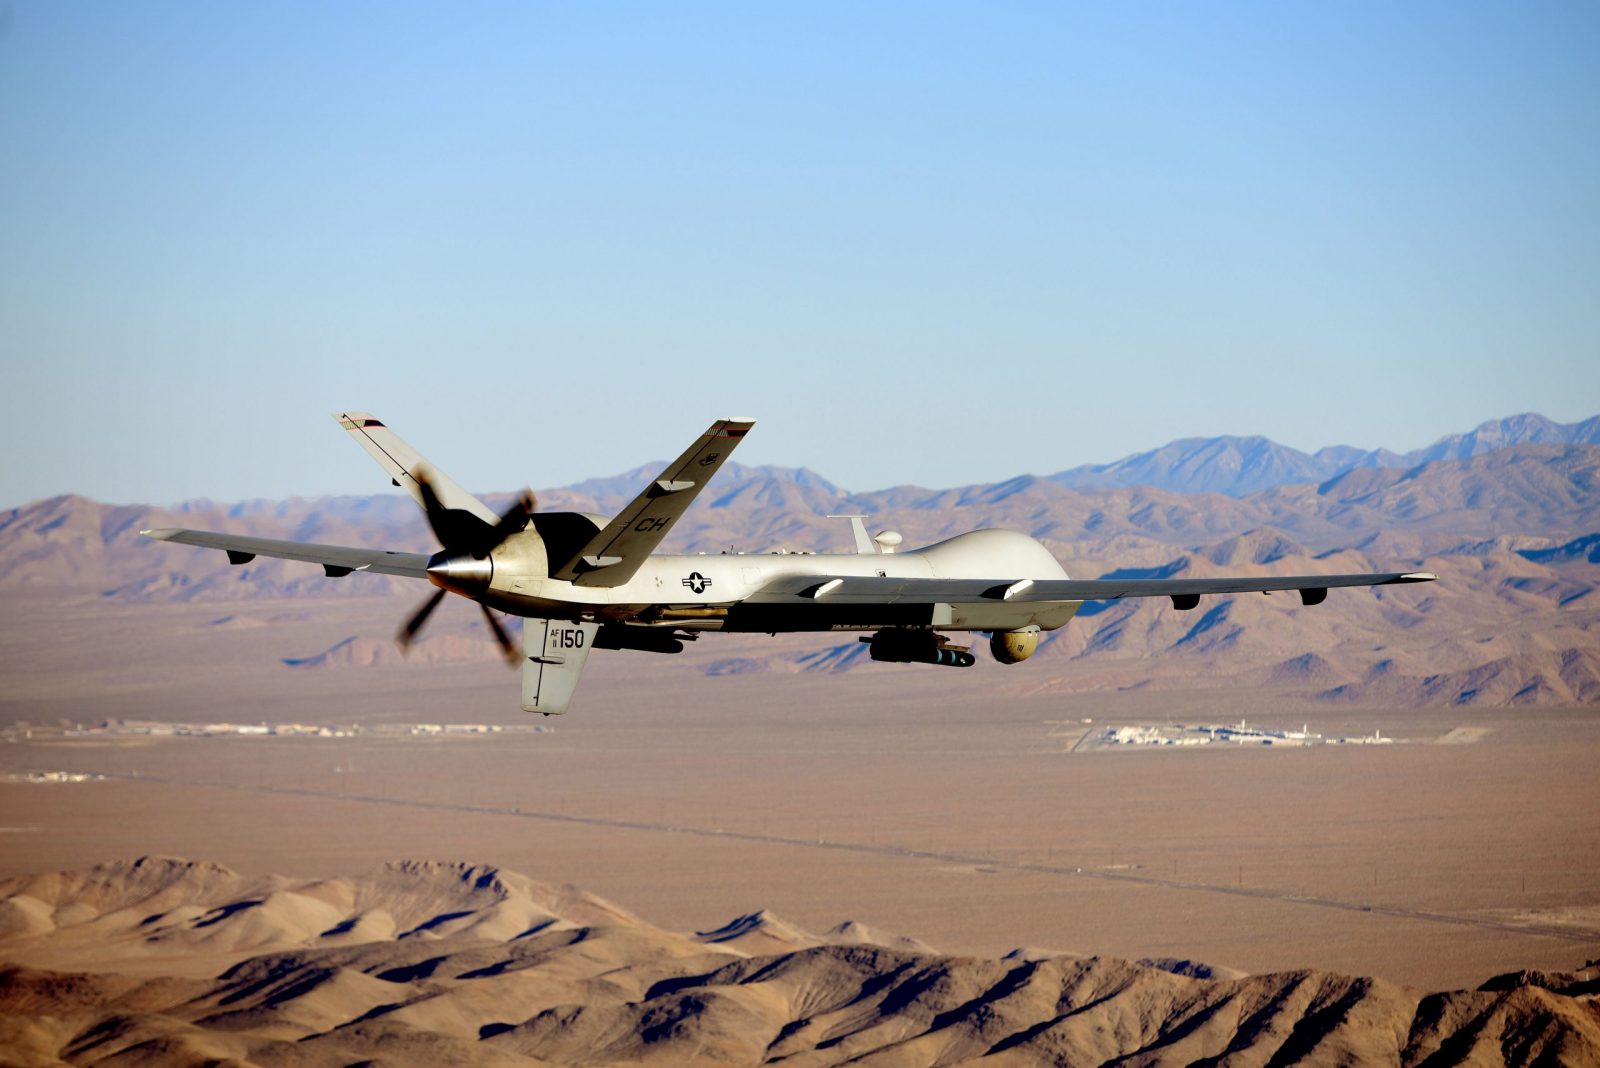 epa10522758 A handout photo made available by the U.S. Air Force of an MQ-9 Reaper flying a training mission over the Nevada Test and Training Range, USA 15 July 2019 (issued 14 March 2023). The United States European Command (EUCOM) said in a statement that two Russian Su-27 aircraft 'conducted an unsafe and unprofessional intercept' with a US unmanned MQ-9 aircraft that was operating within international airspace over the Black Sea on 14 March 2023. The incident occurred at about 7:03 AM (CET) when one of the Russian aircraft struck the propeller of the MQ-9 causing US forces to bring the unmanned aircraft down in international waters, the statement added.  EPA/Airman 1st Class William Rio Rosado HANDOUT  HANDOUT EDITORIAL USE ONLY/NO SALES